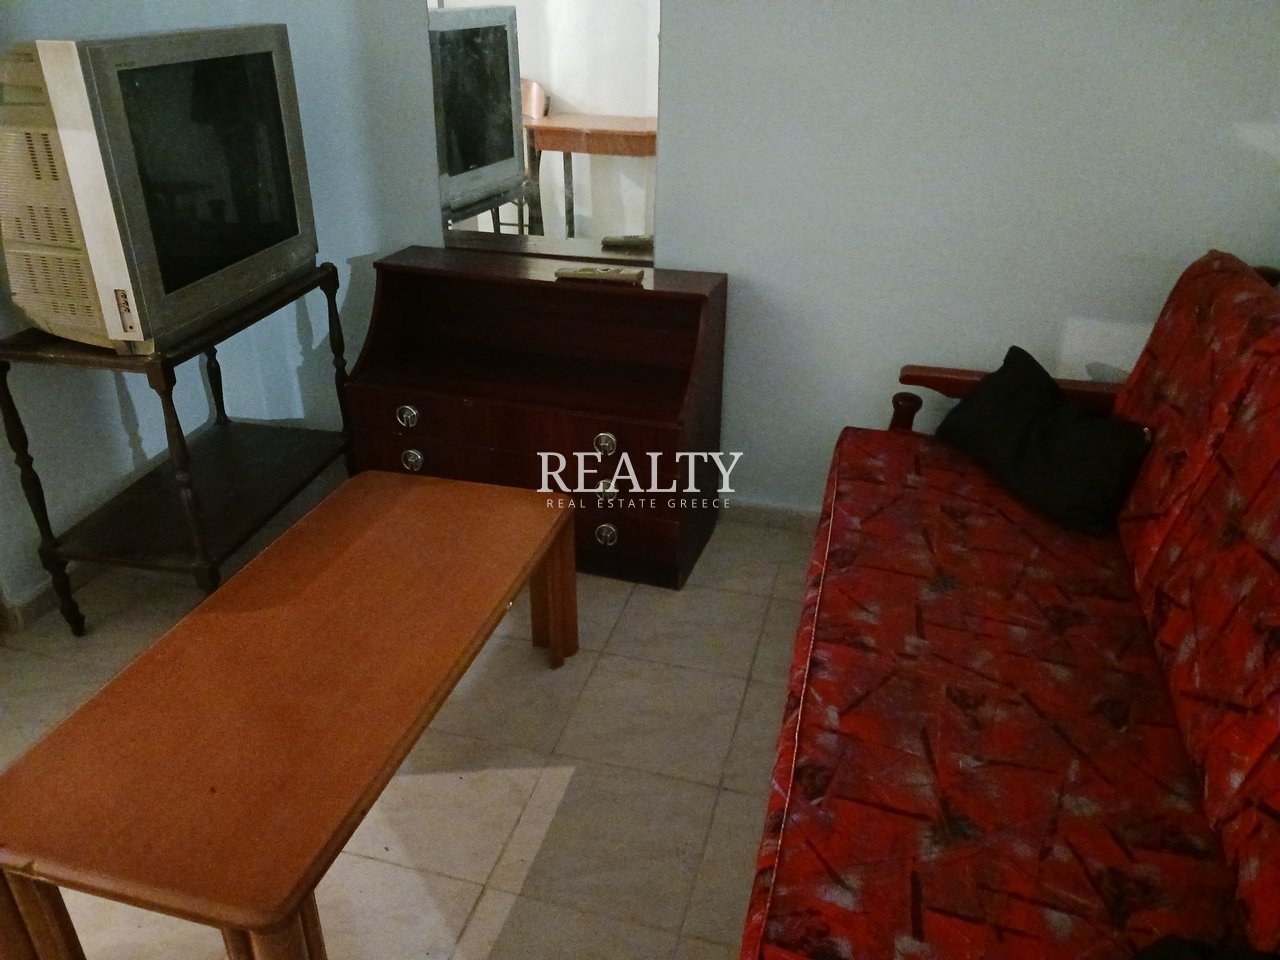 FLATS for Rent - THESSALONIKI EAST